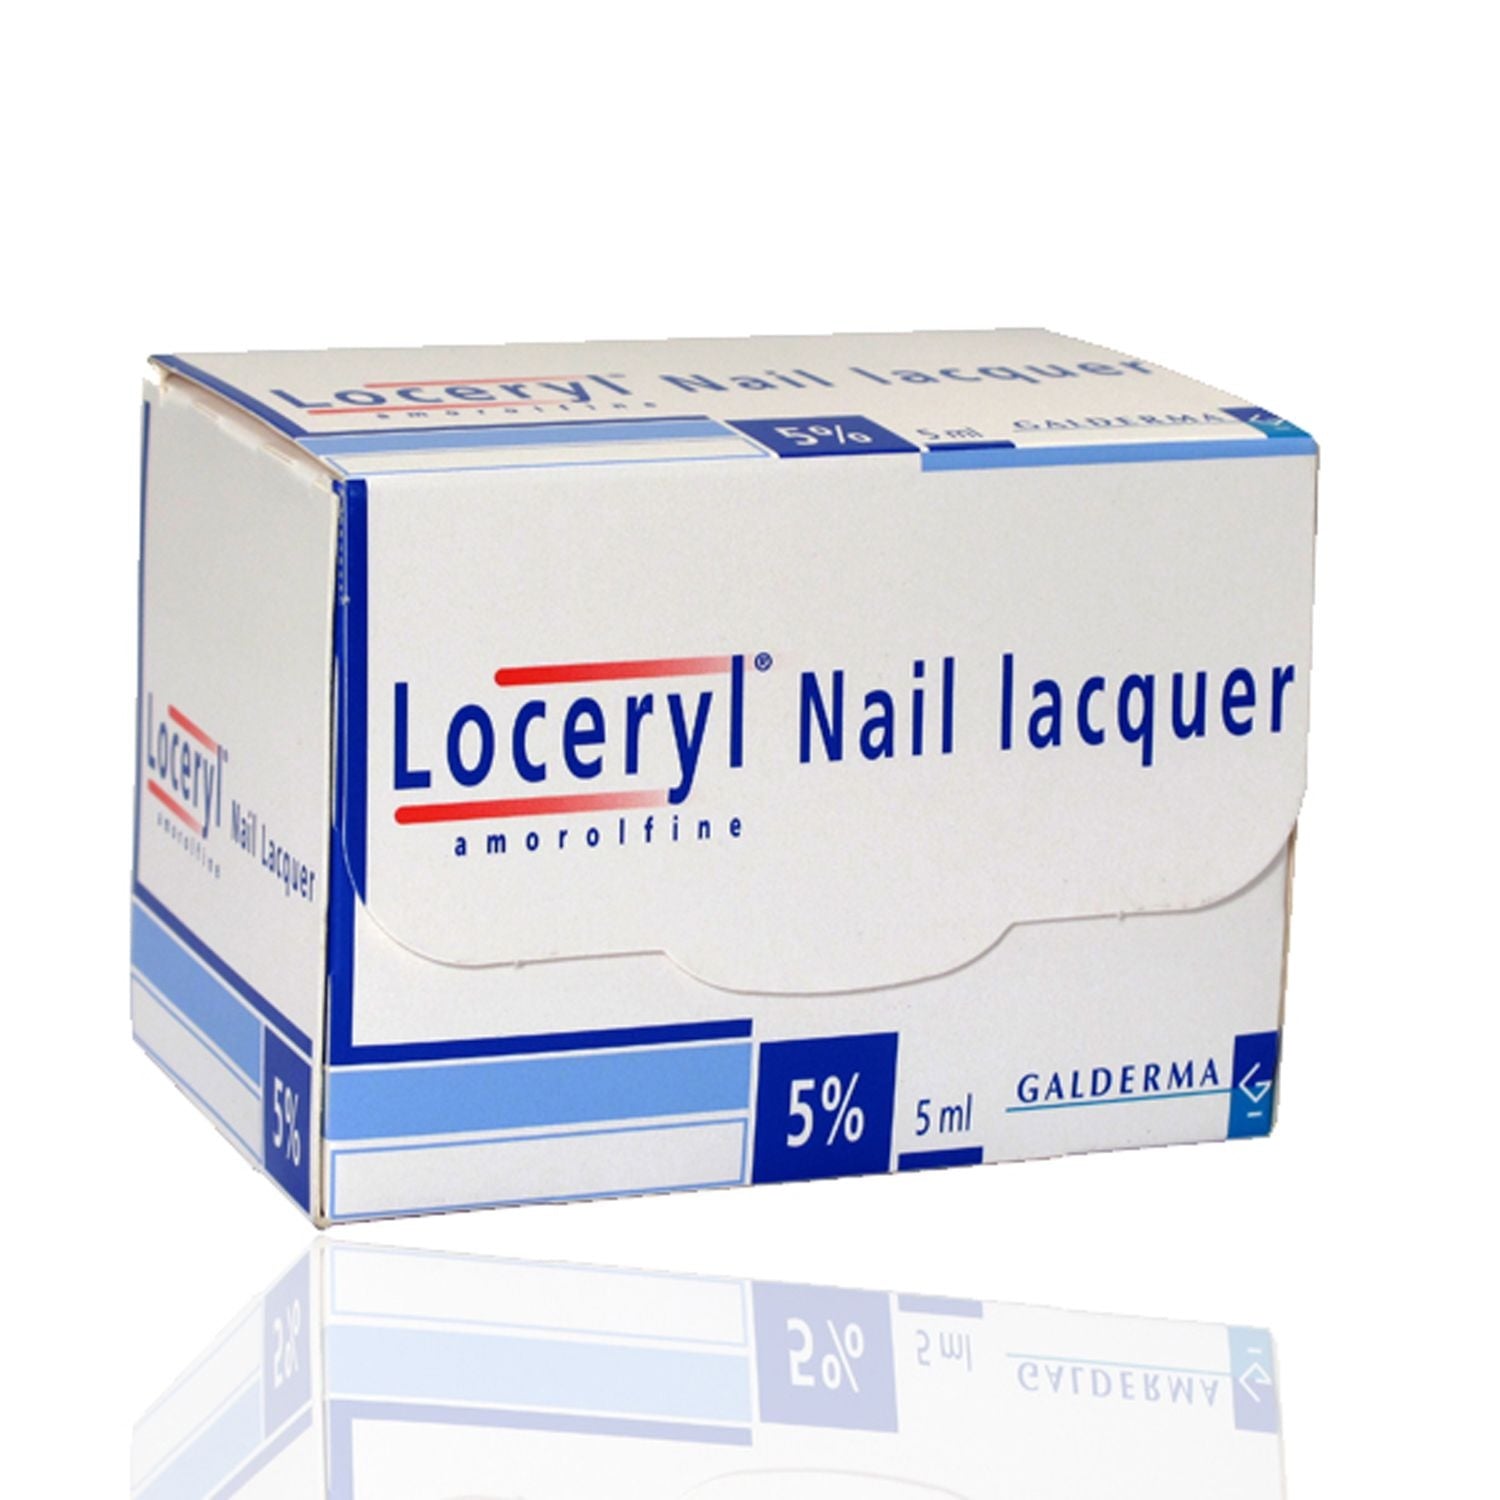 Loceryl Nail Laquer (Amorolfine Hydrochloride Nail Lacquer) | POM | 5% | Bottle | Pack of 1